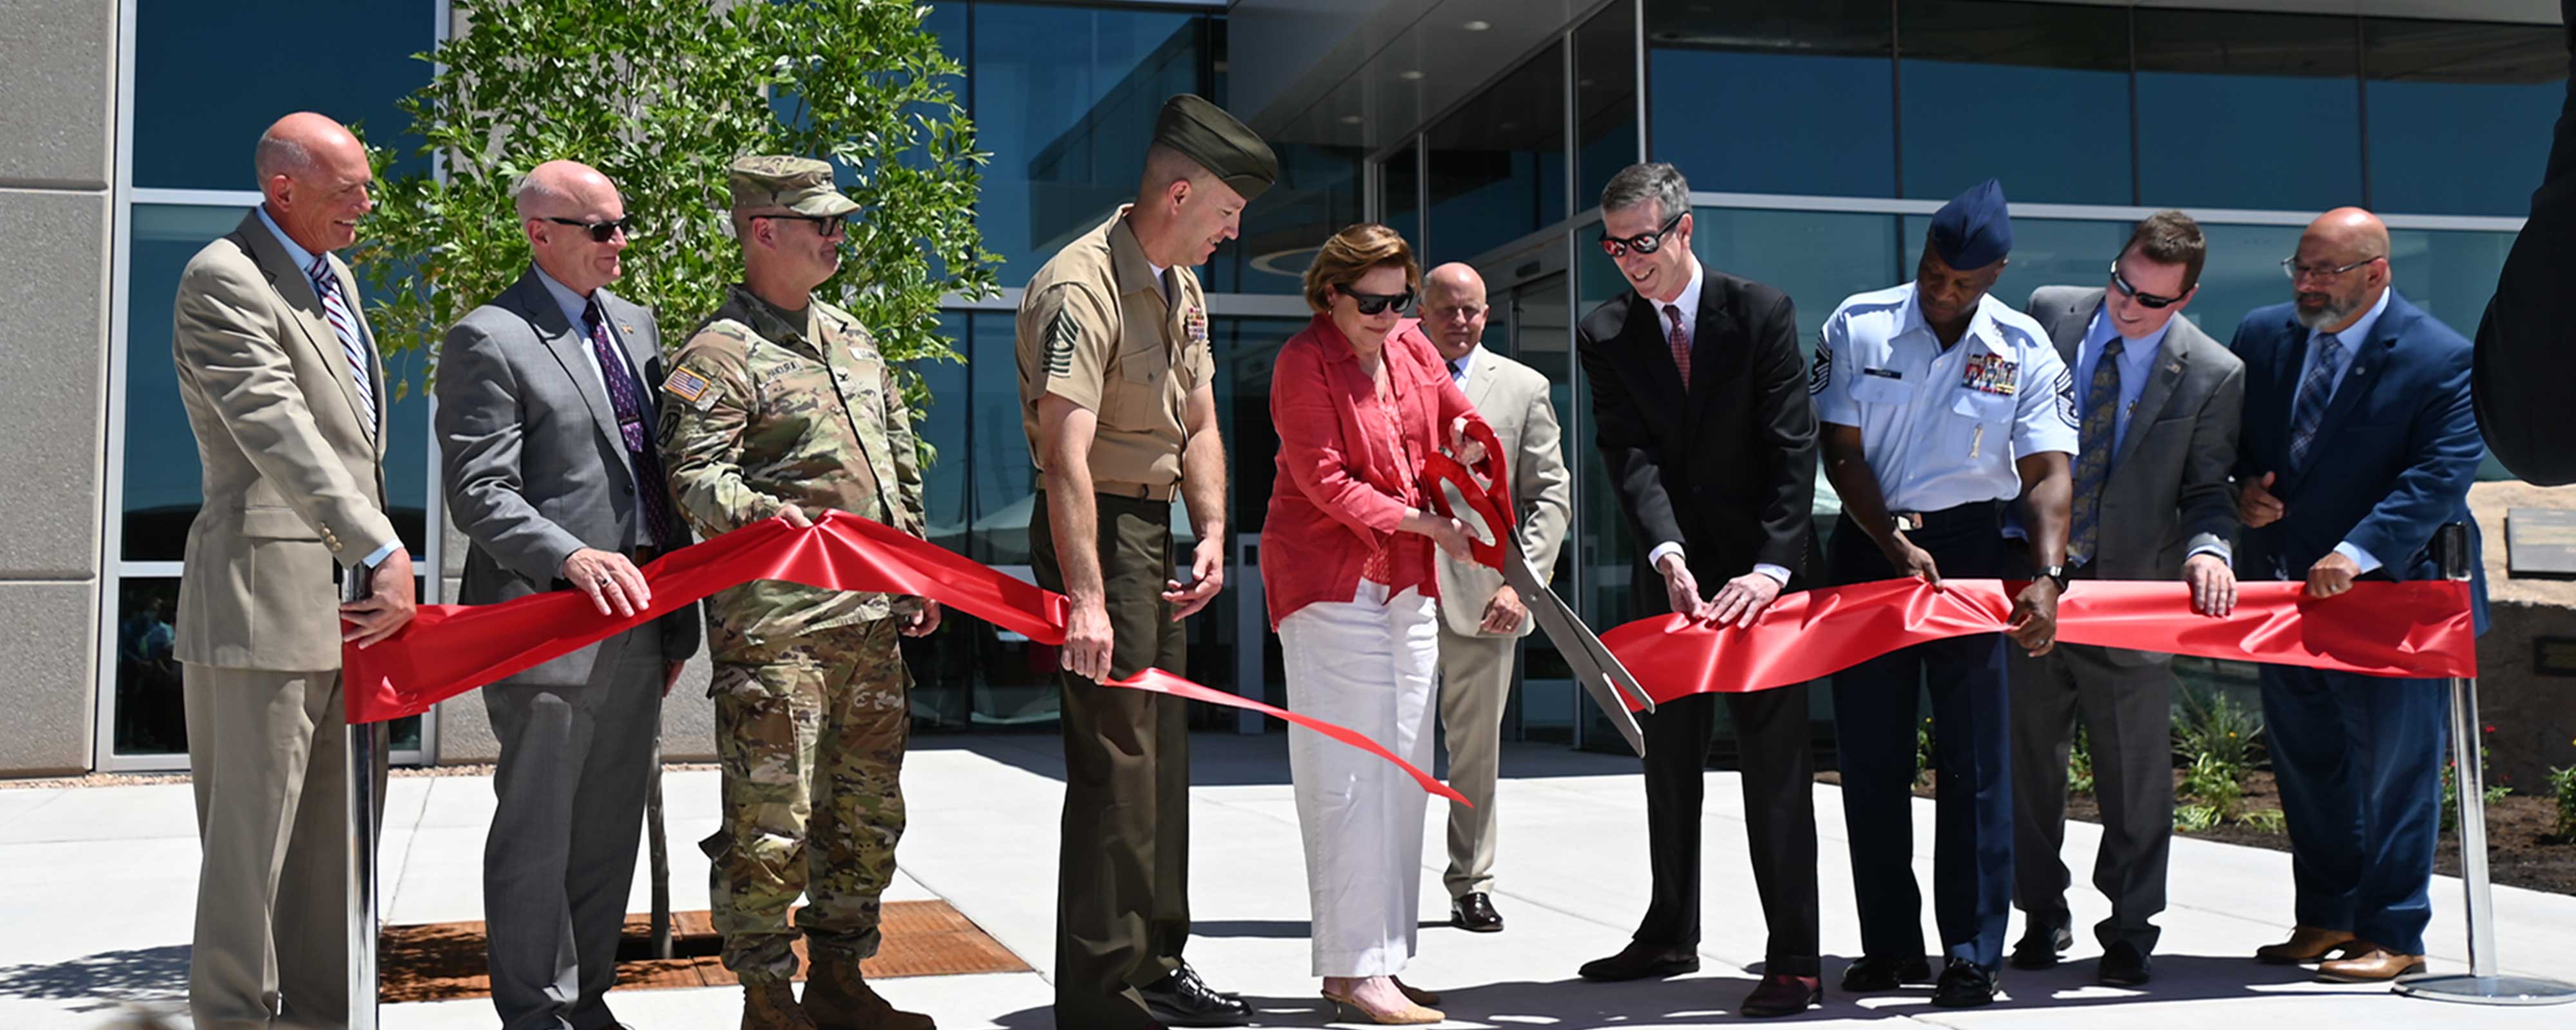 DTRA Albuquerque Opens New Facility at Ribbon Cutting Ceremony On Kirtland Air Force Base